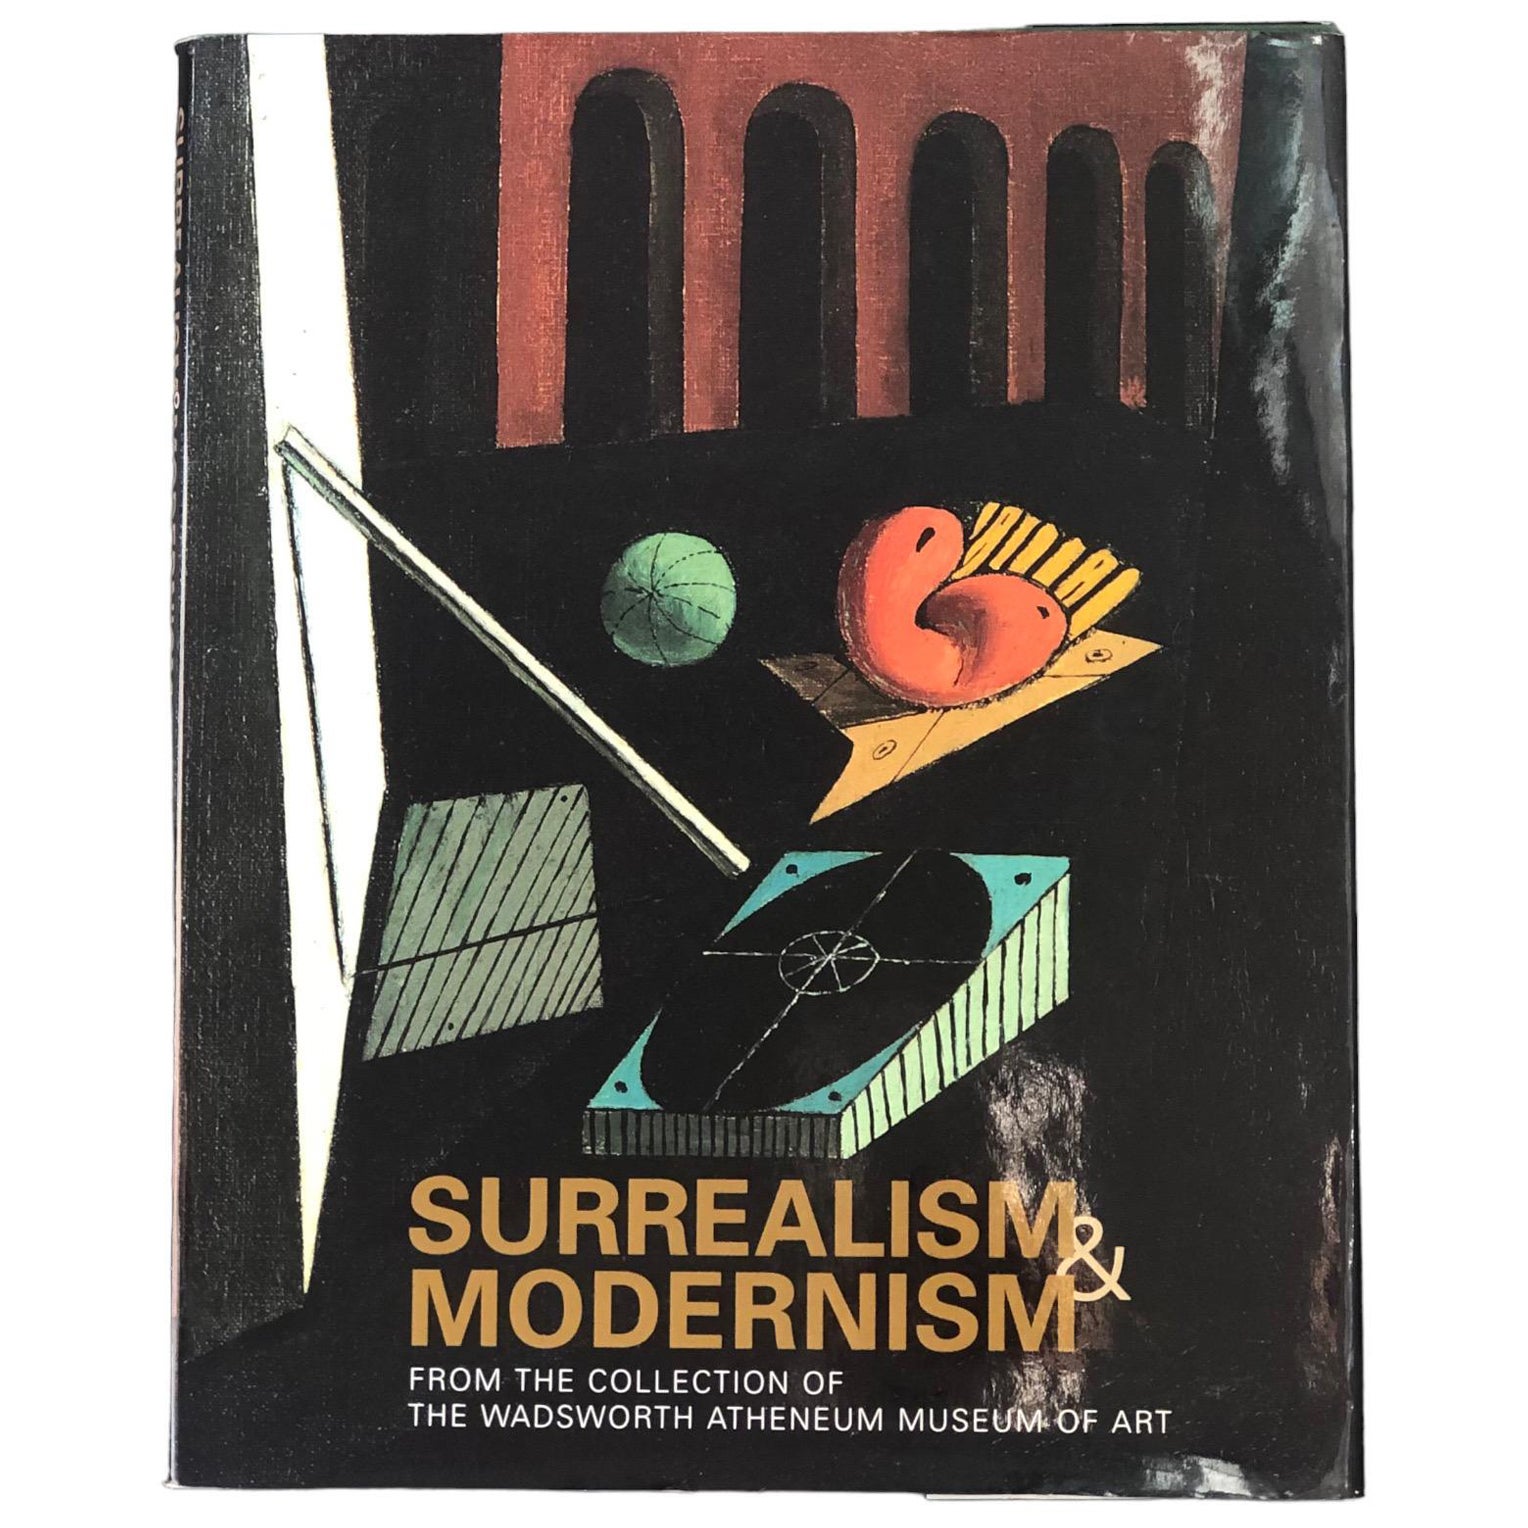 Surrealism & Modernism From the Collection of Wadsworth Atheneum Museum of Art For Sale